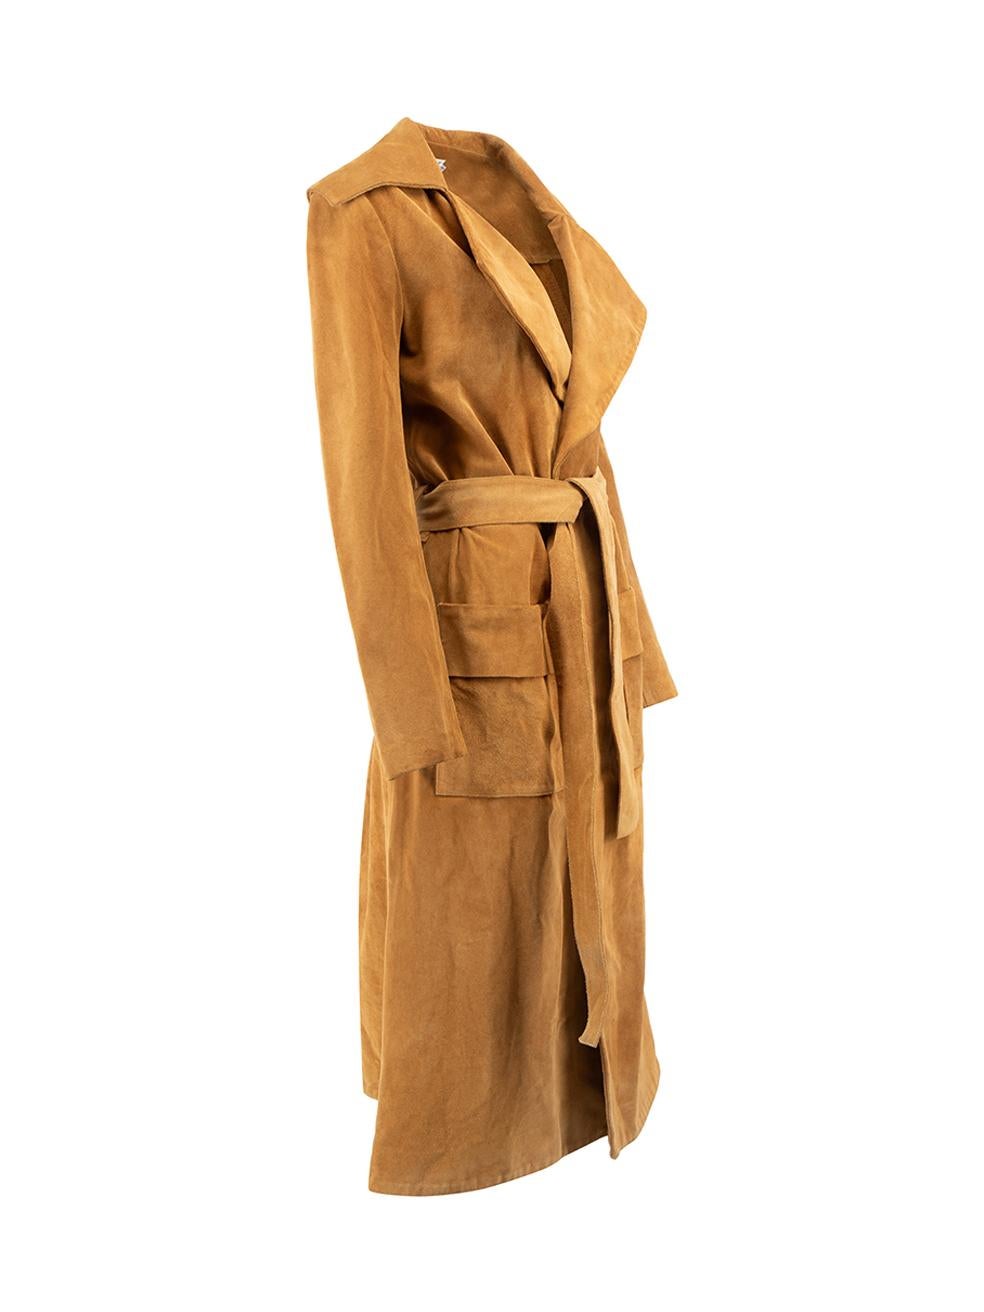 CONDITION is Good. Minor wear to coat is evident. Light wear to the left underarm with a small hole and marks to the leather at the hem and both sleeves on this used FRAME designer resale item. 



Details


Camel

Suede

Trench coat

Long